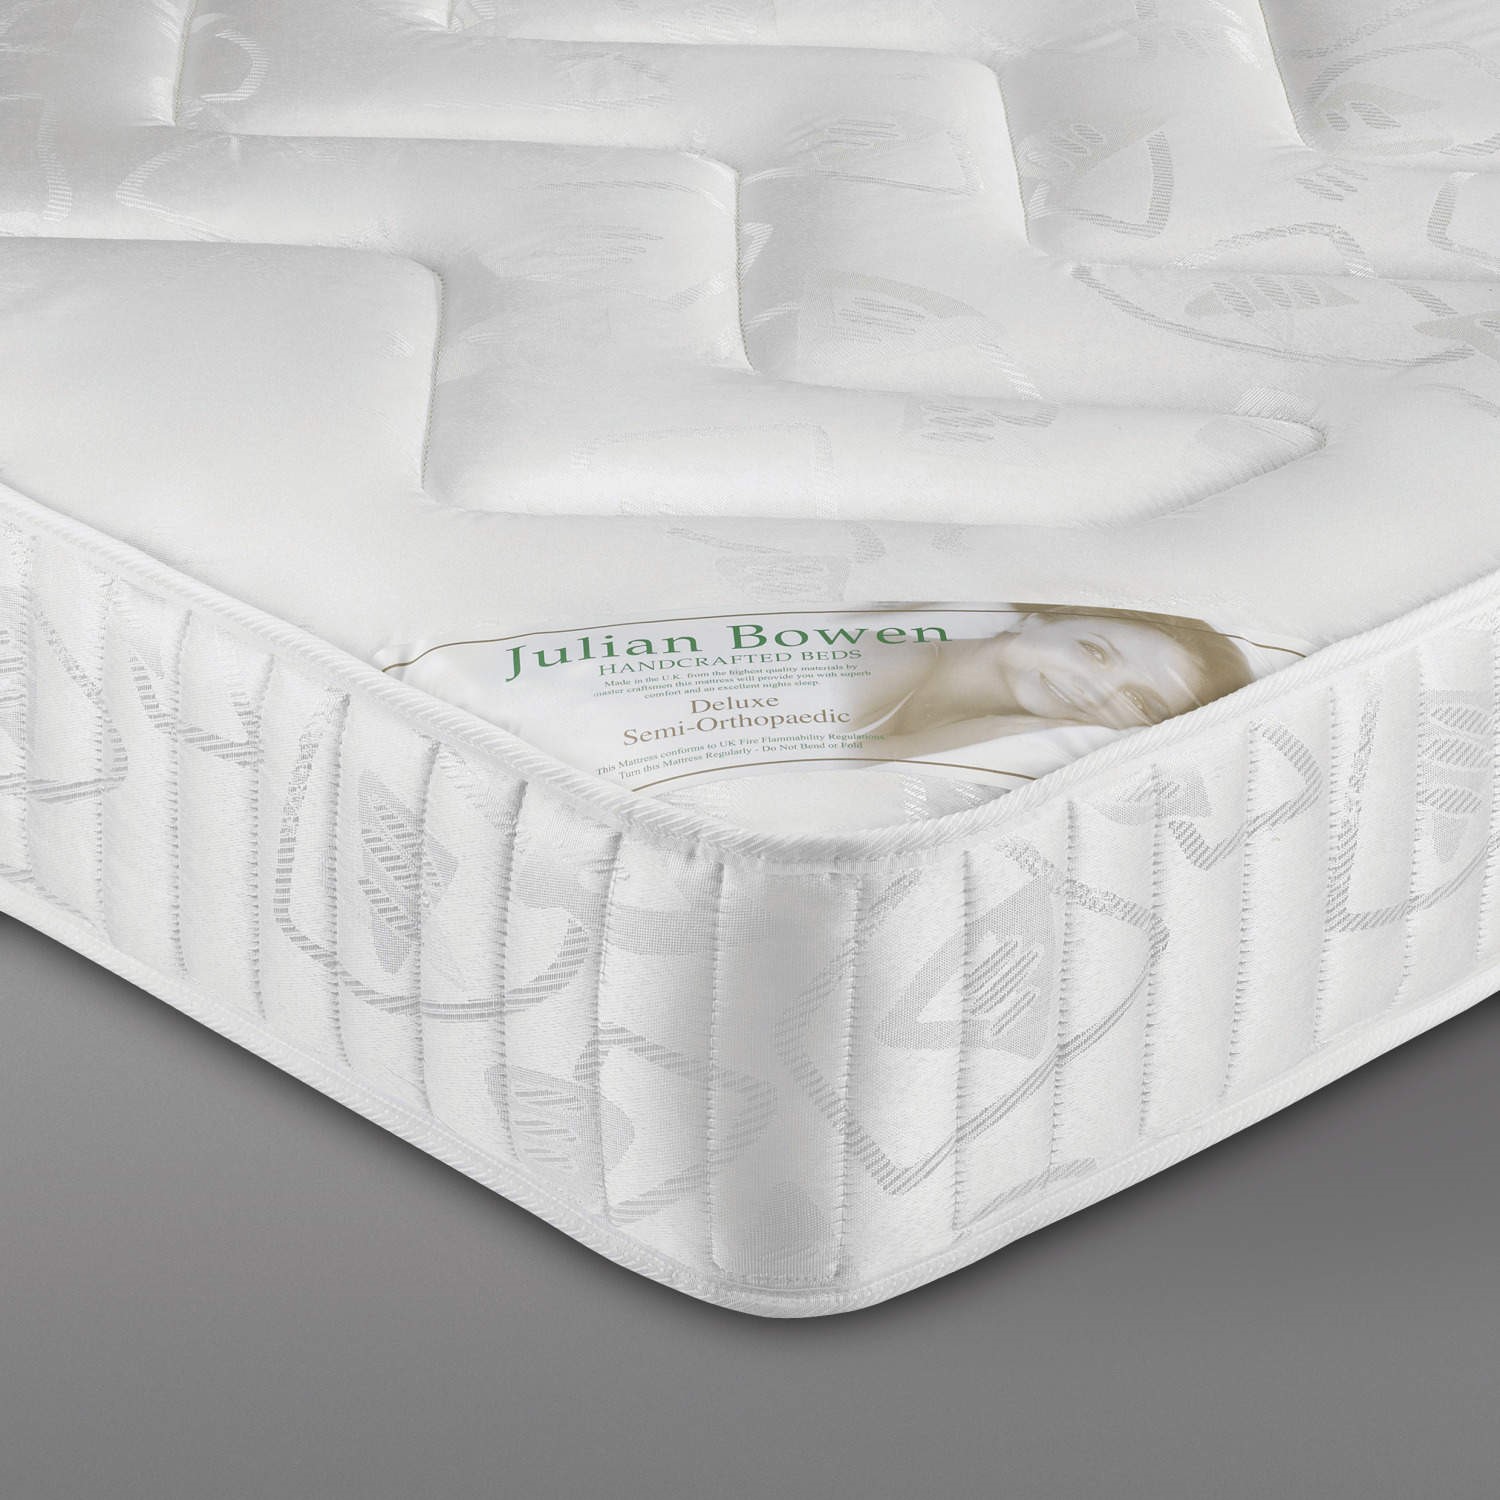 Julian bowen firm semi-orthopaedic quilted spring mattress - double